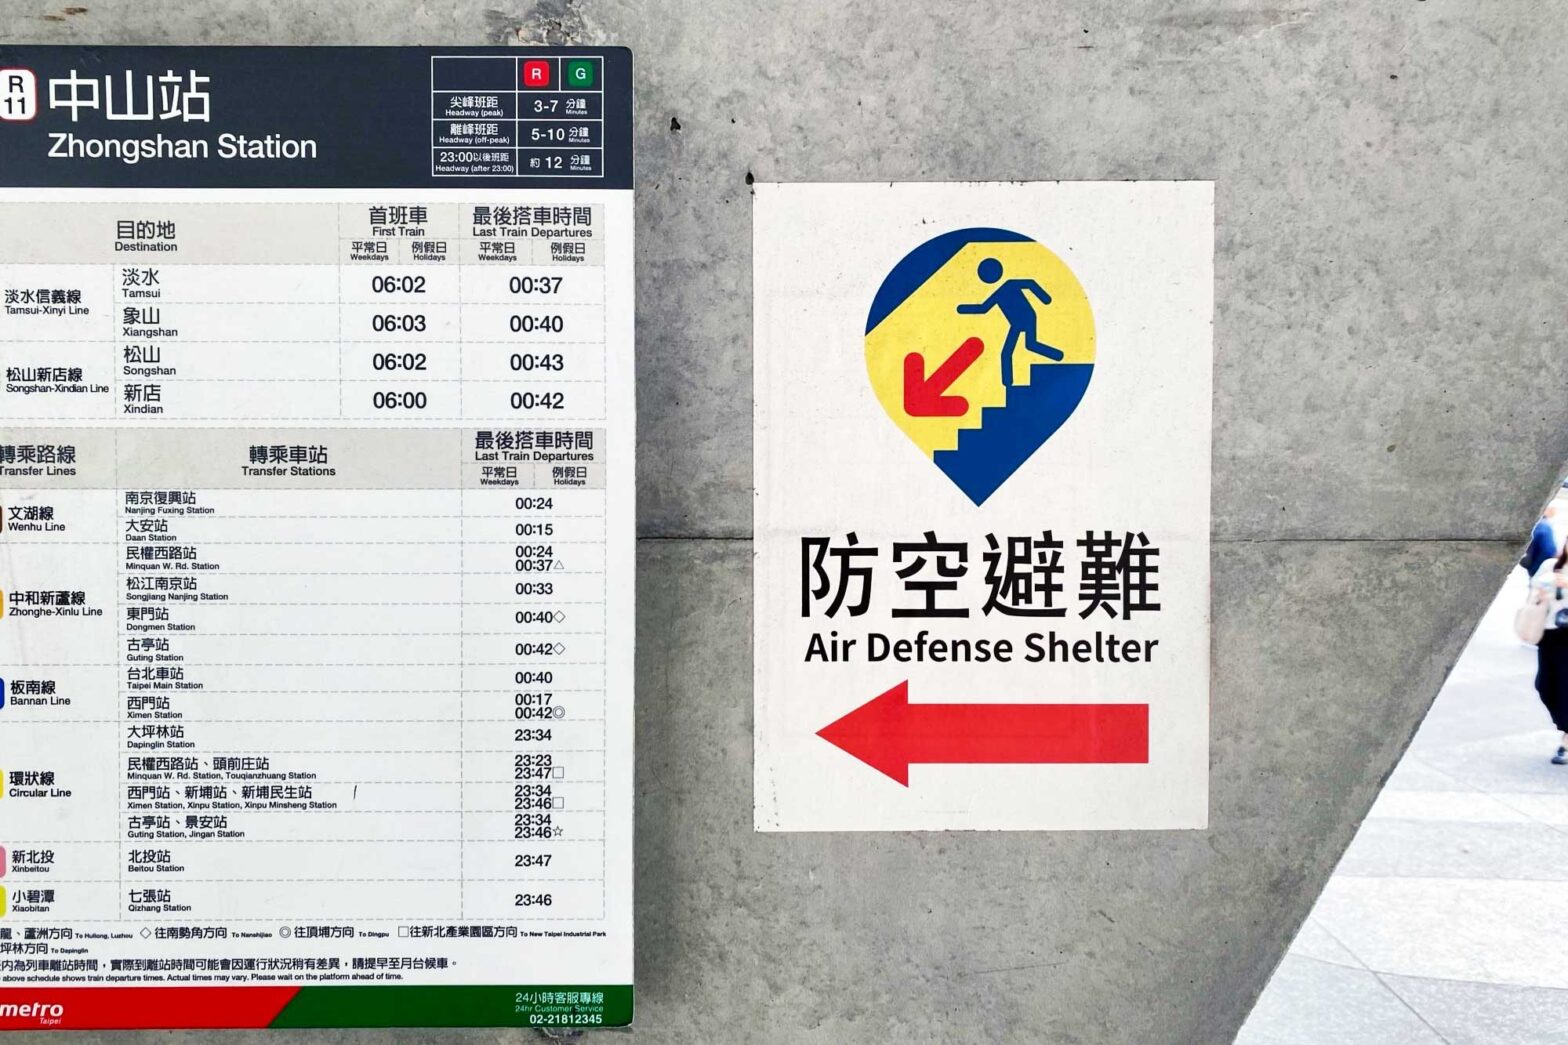 A small poster stuck to a wall next to a train sign, the poster depicts an arrow and pictogram showing the way to an air defence shelter